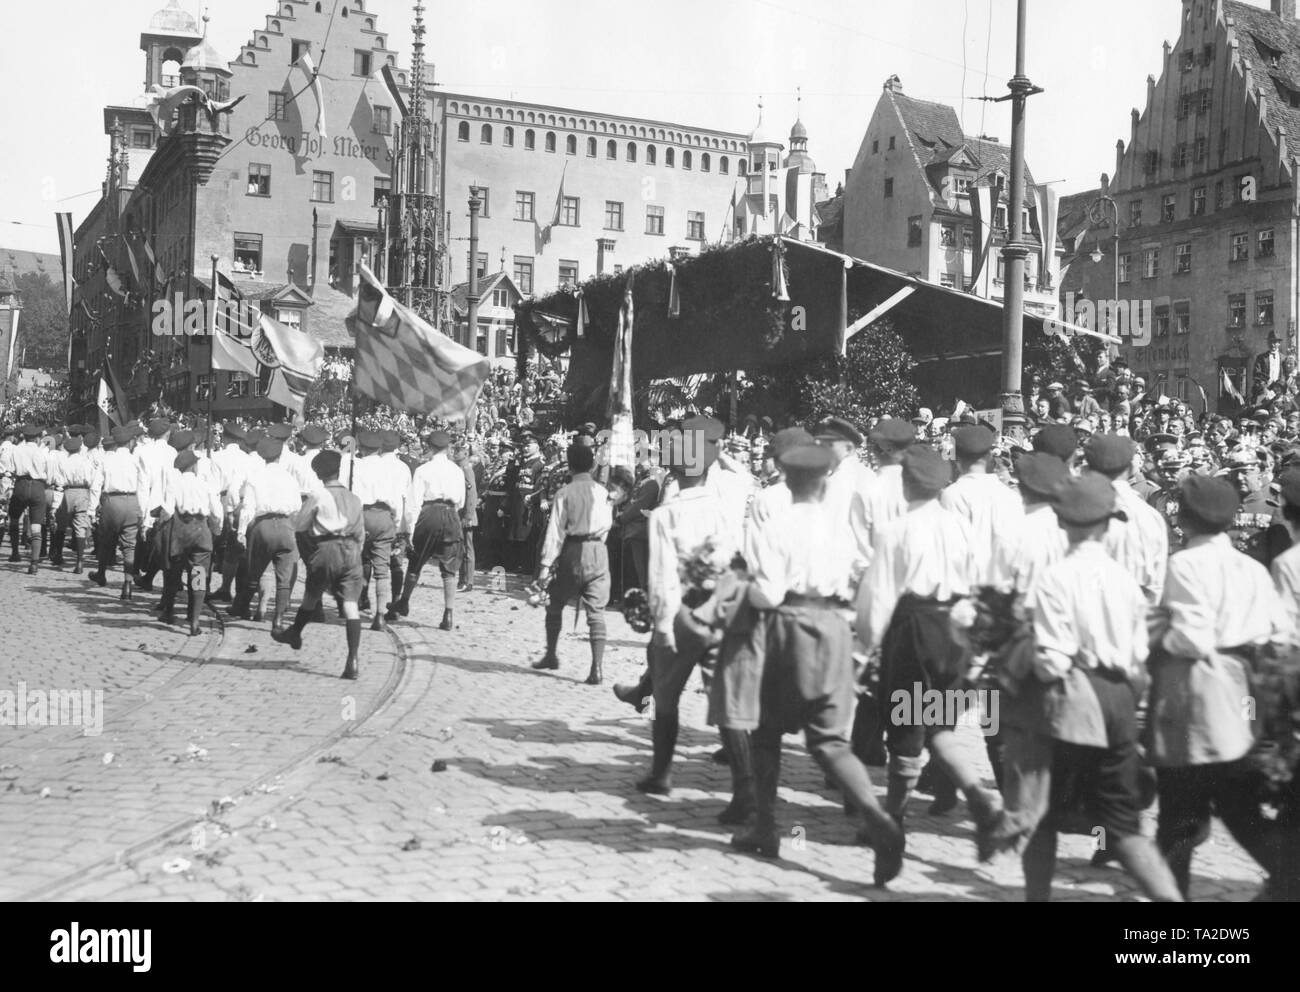 National youth organizations march in Nuremberg with Reichskriegsflagge (imperial war flag) and the Bavarian flag. Officers and generals are watching them in front of grandstands decorated with garlands. Stock Photo